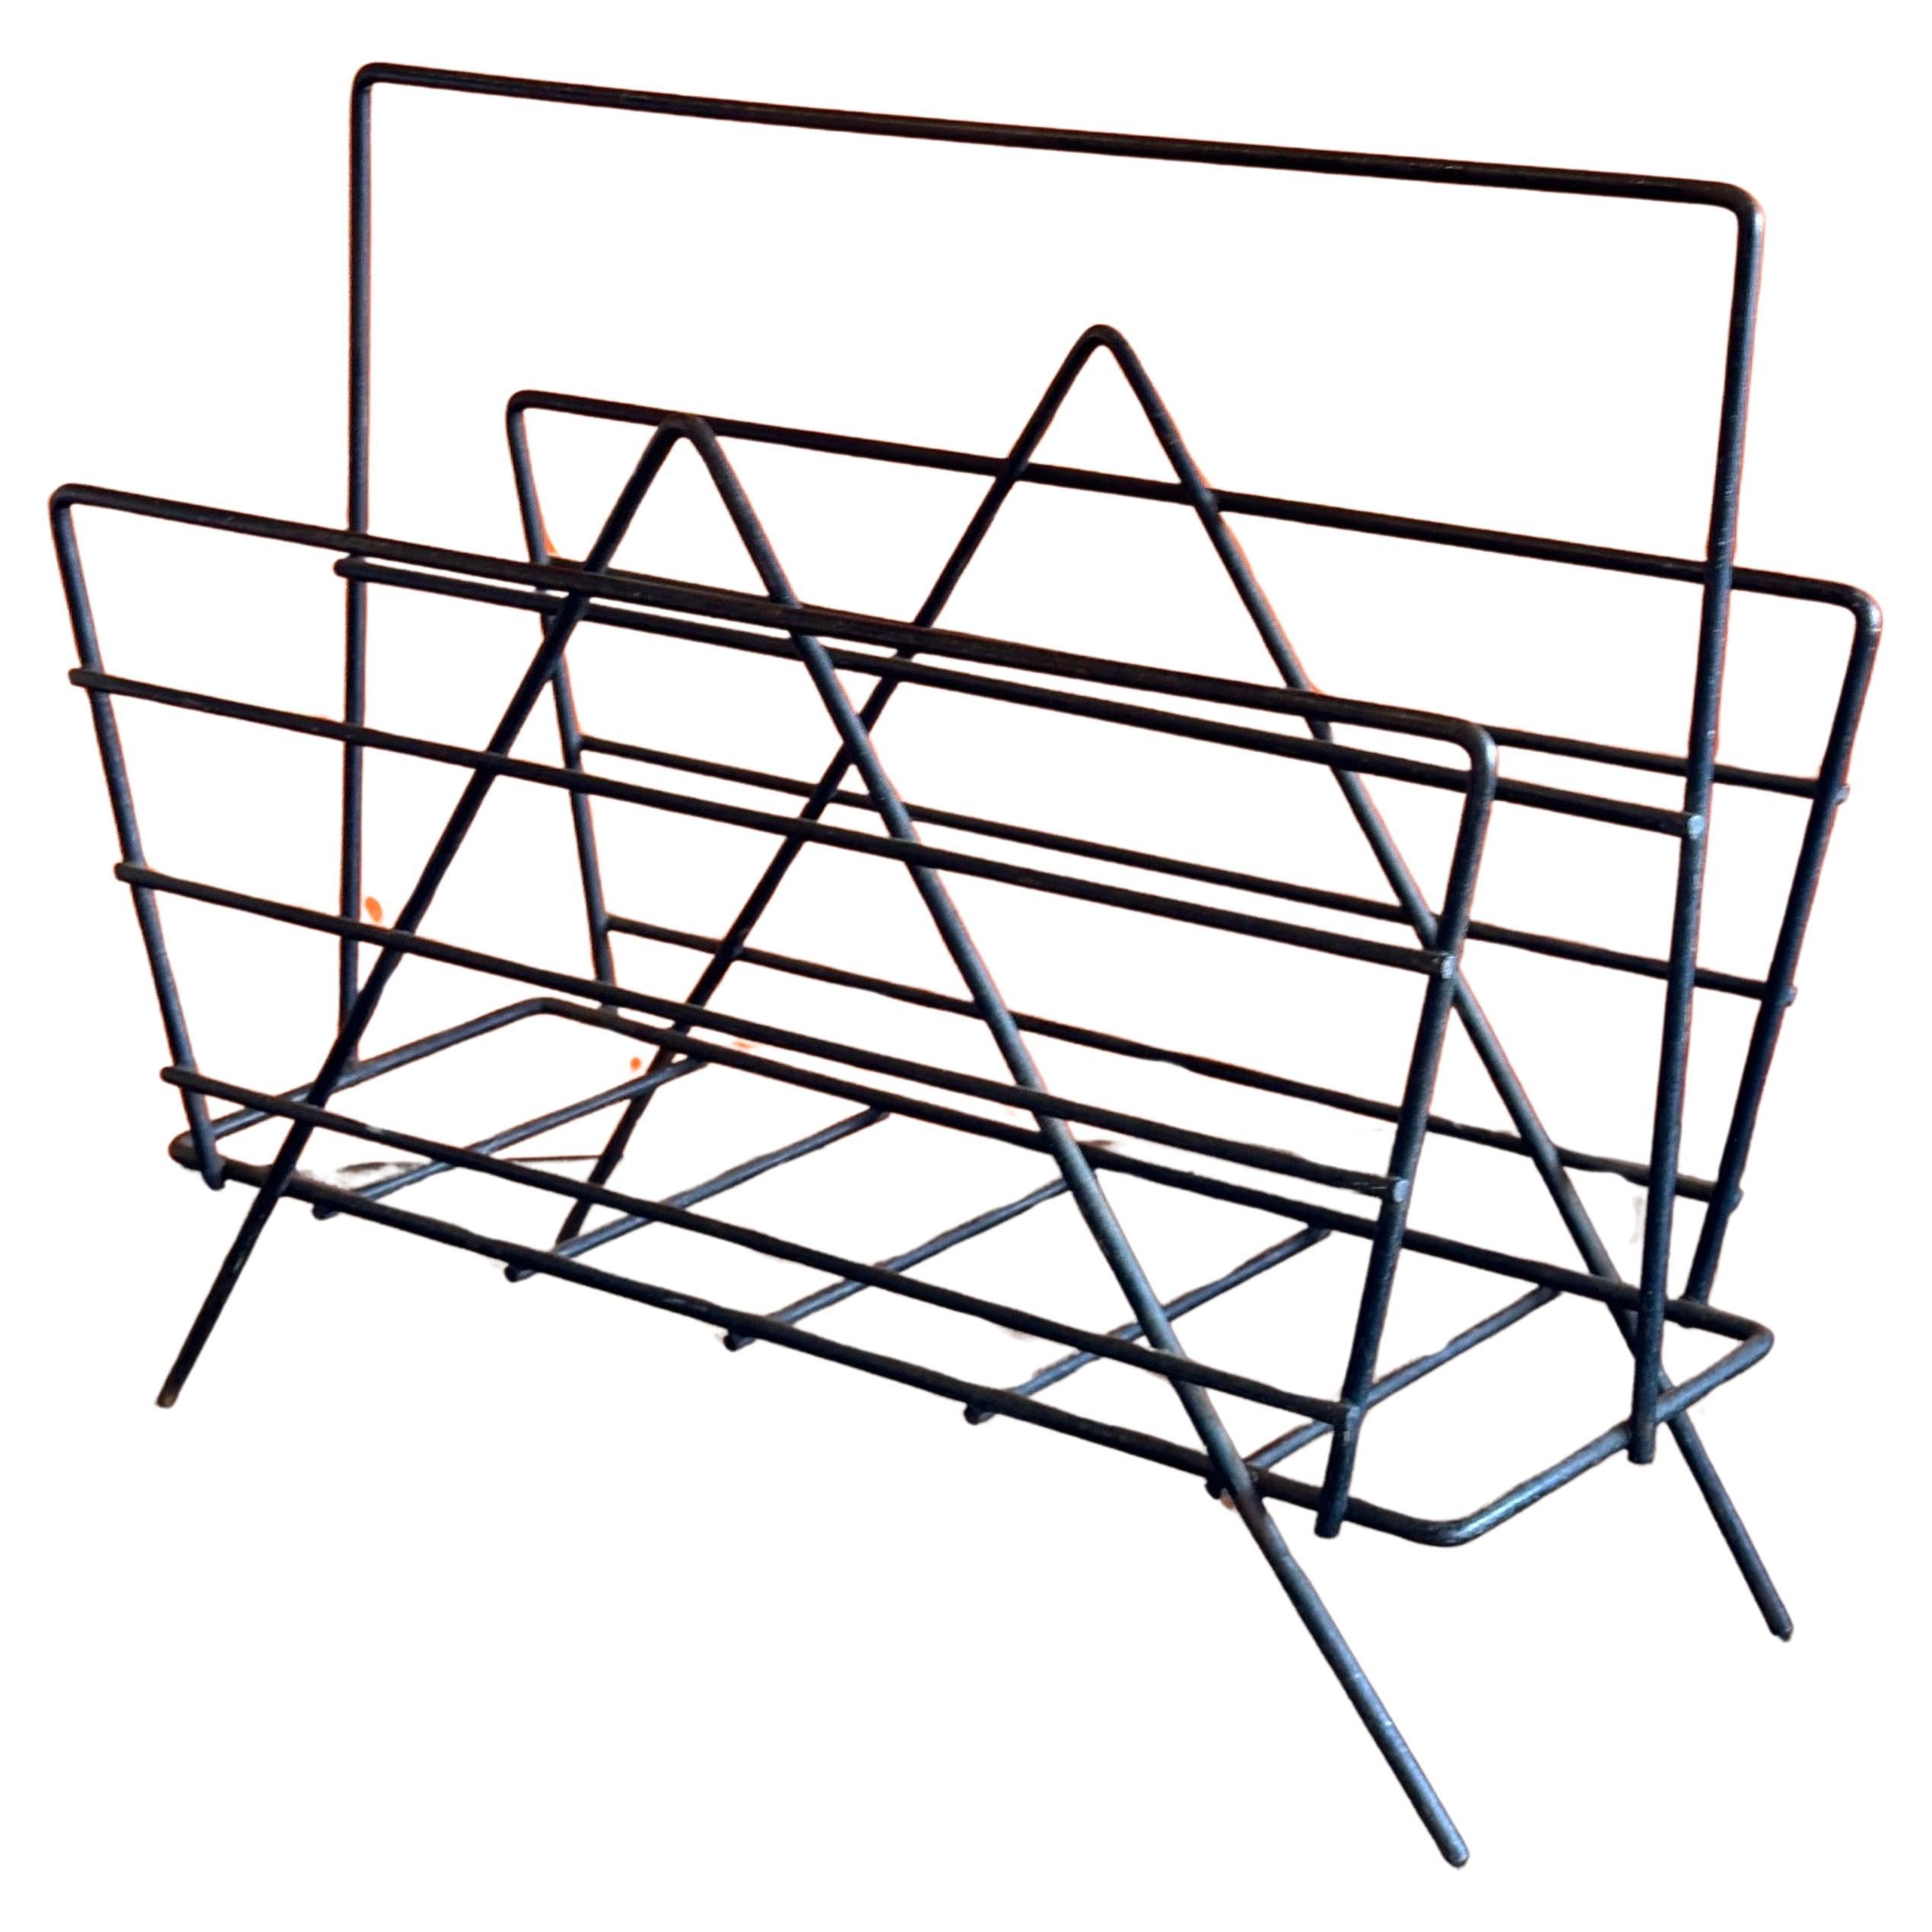 Mid-century modern iron wire magazine rack, circa 1970s.  The rack is in good vintage condition with some wear and a great patina. Measurements: 18.25